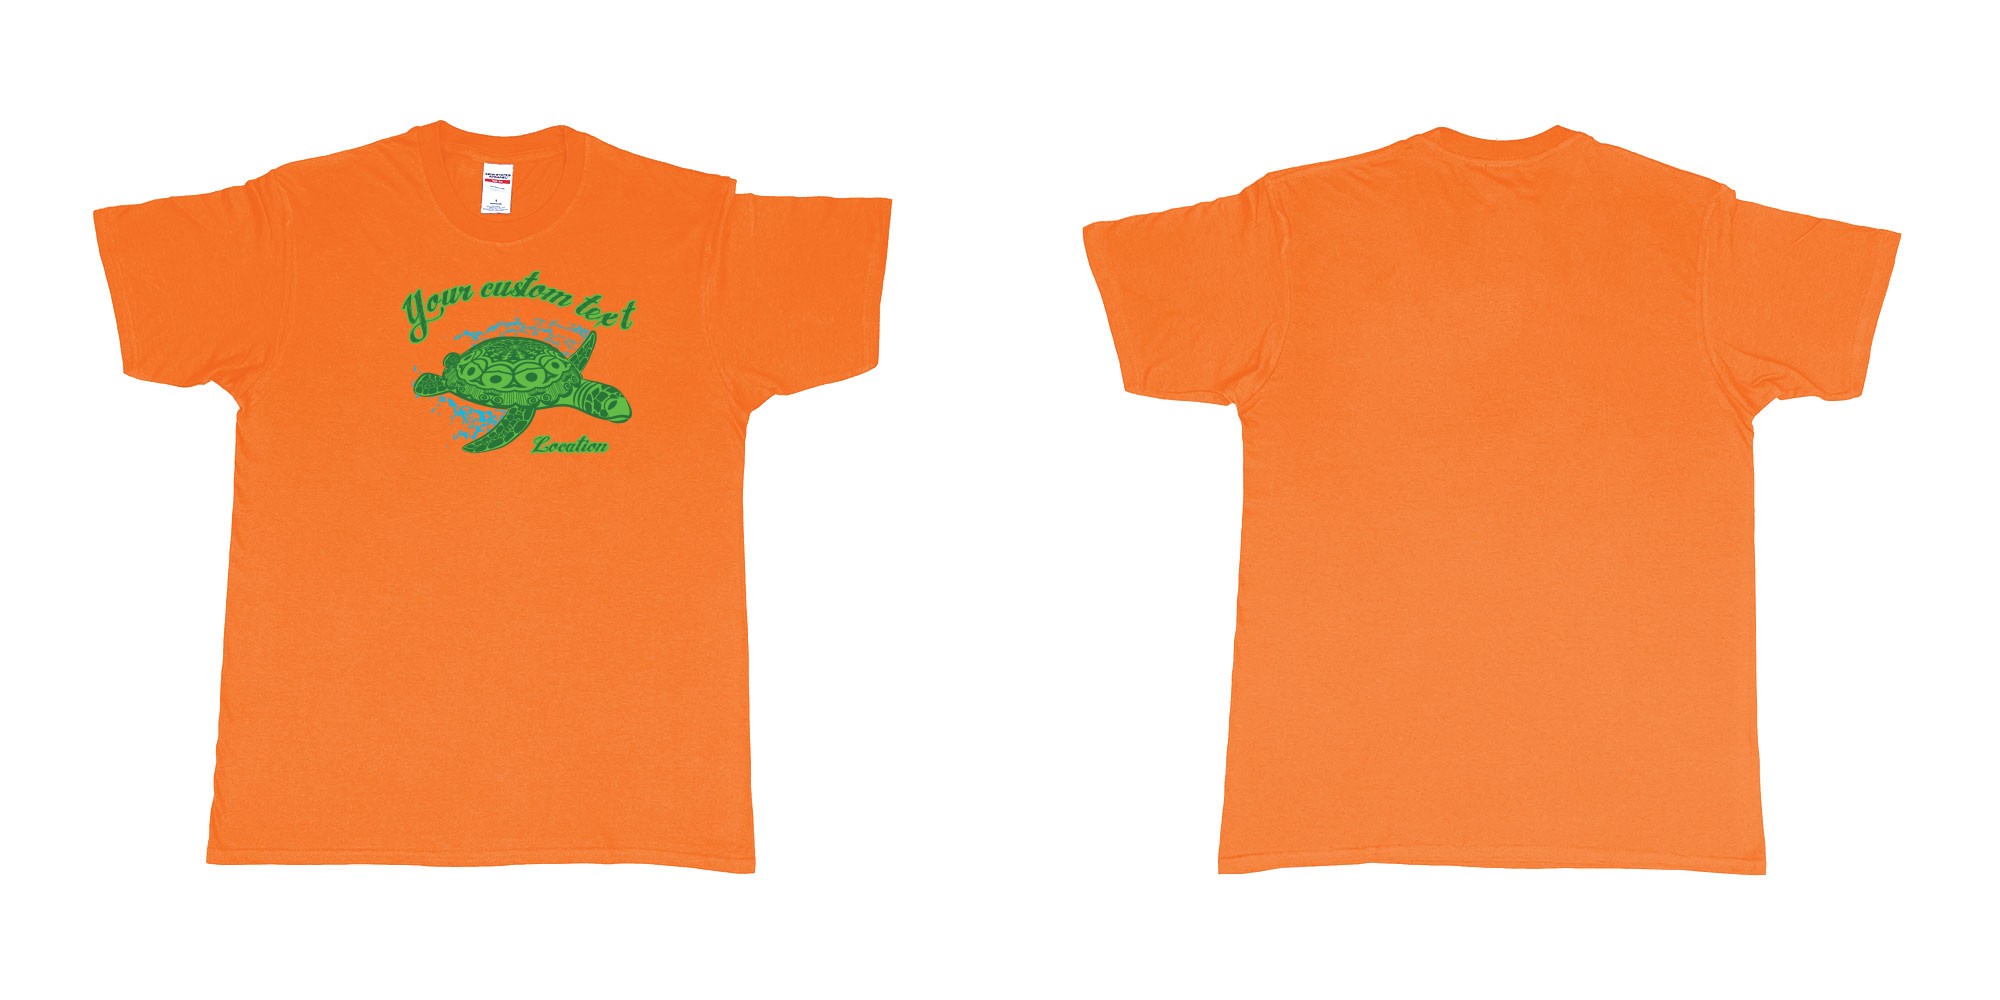 Custom tshirt design turtle swimming design bali in fabric color orange choice your own text made in Bali by The Pirate Way